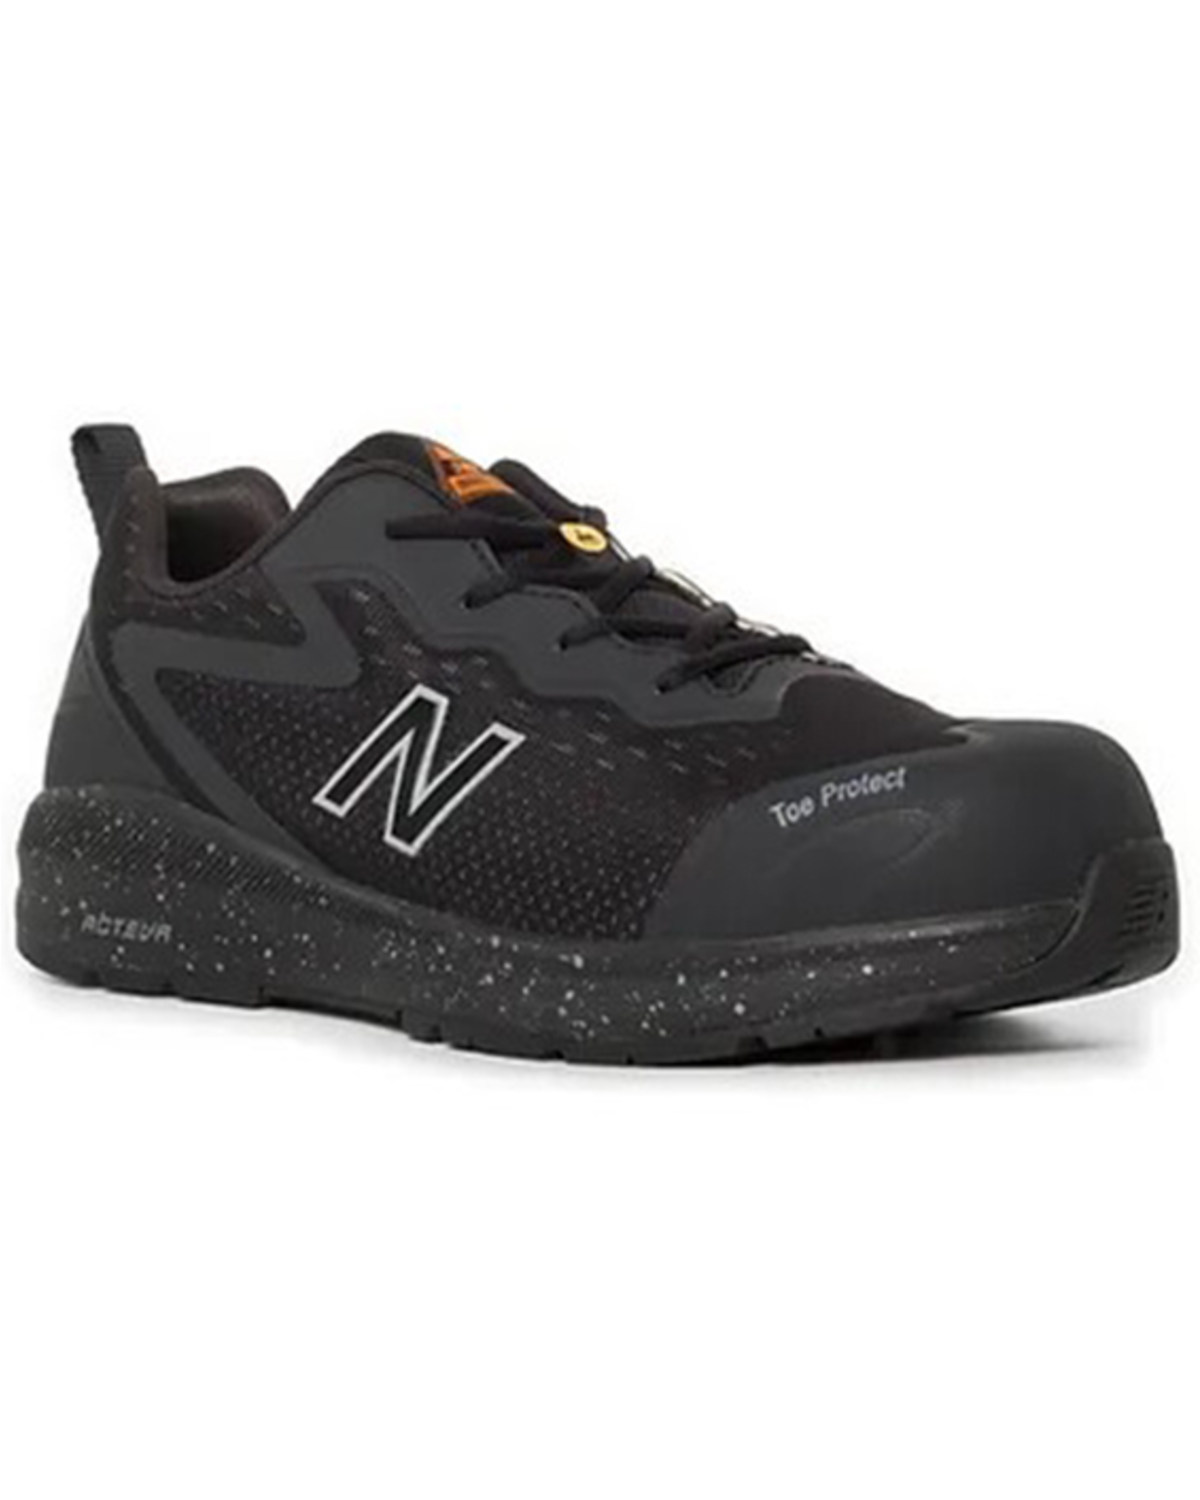 New Balance Women's Logic Puncture Resistant Work Shoes